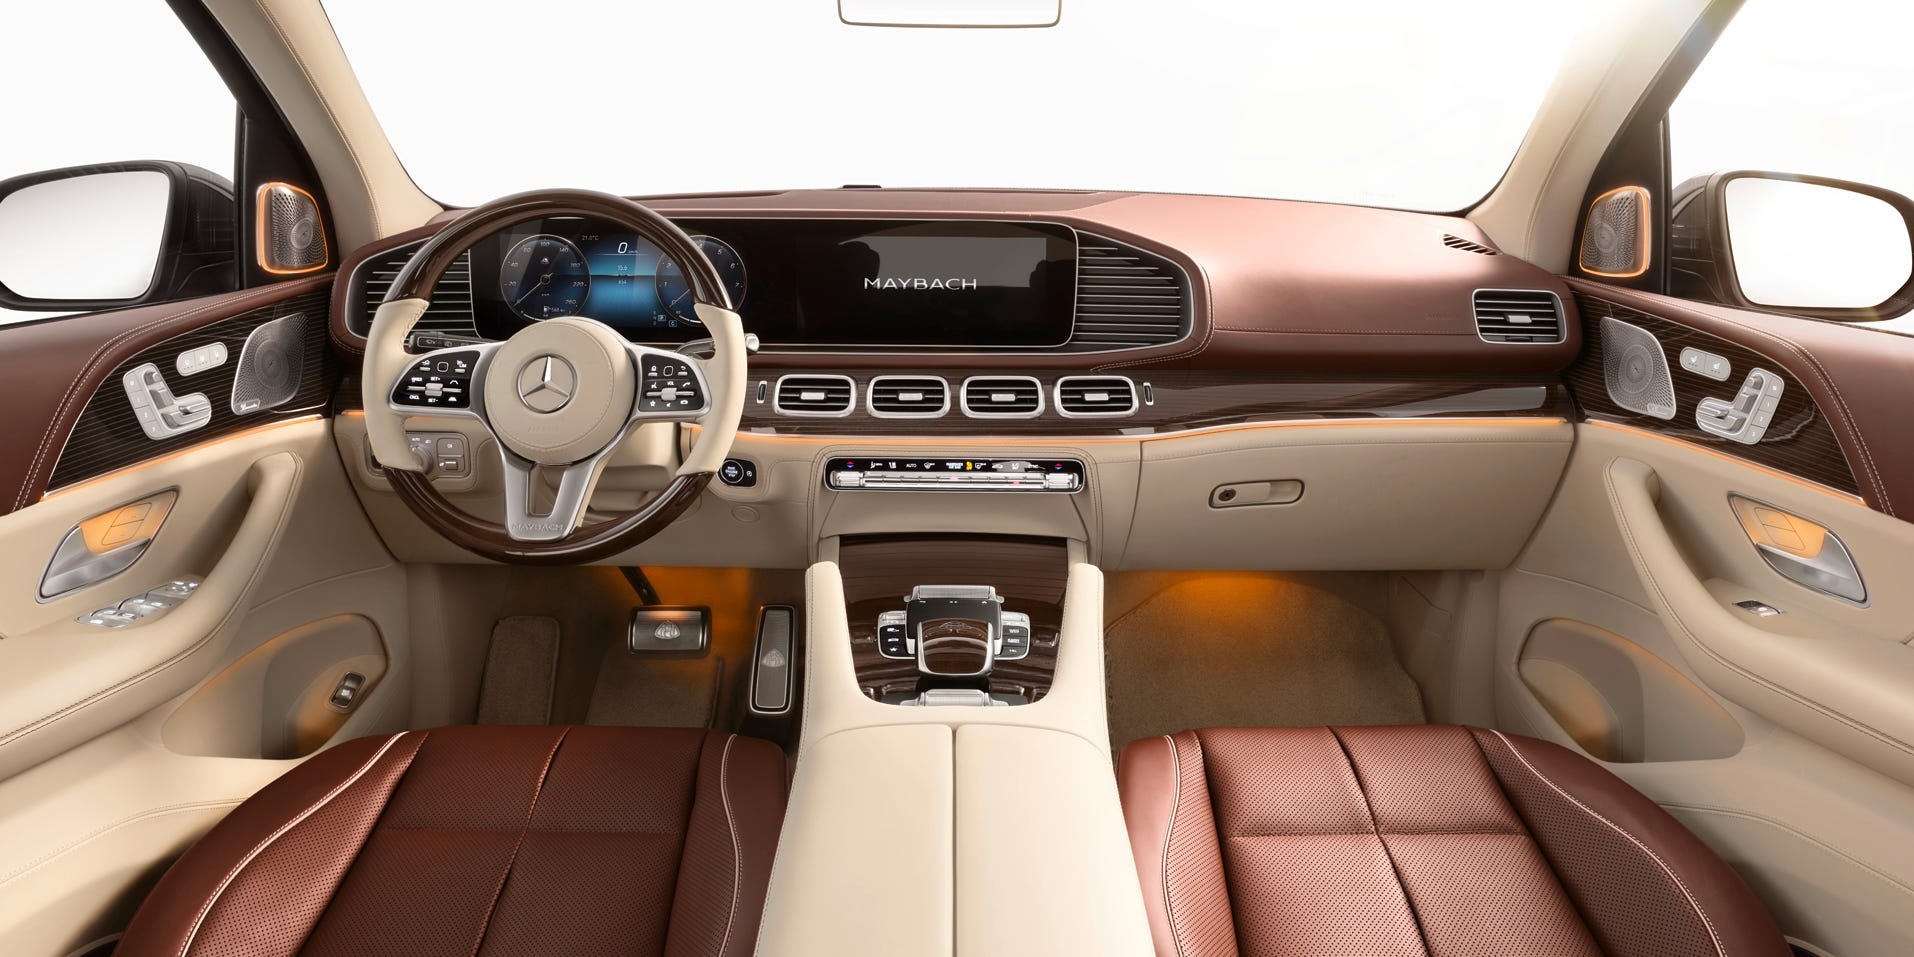 Mercedes-Benz has a new ultra-luxurious Maybach SUV that comes with